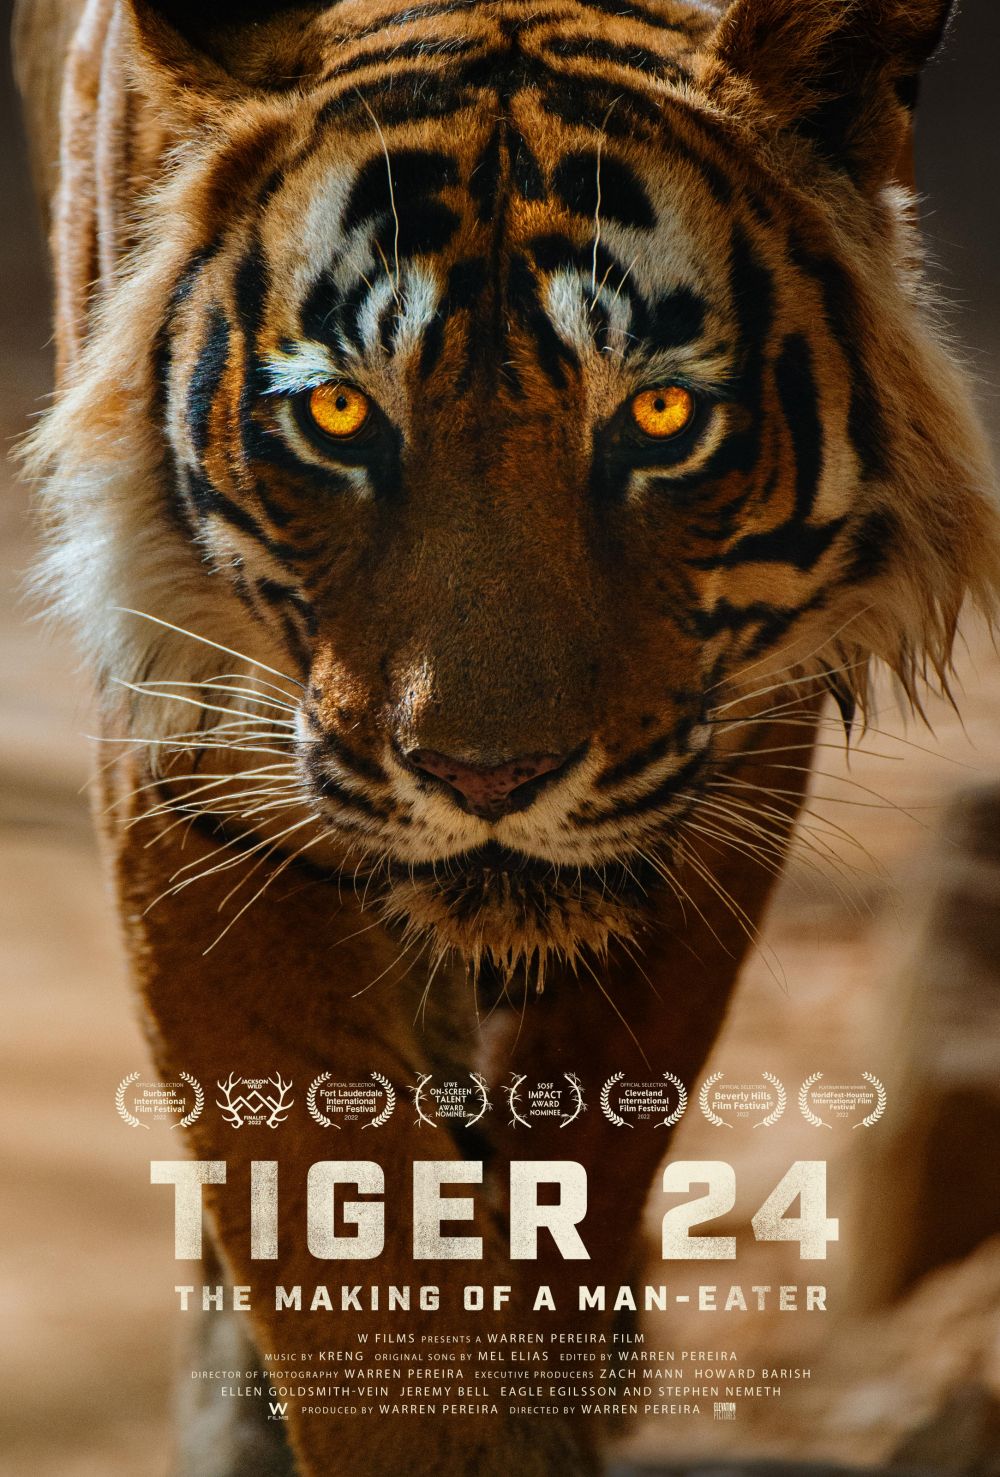 Tiger 24 will be available for streaming on all major digital platforms starting December 6.